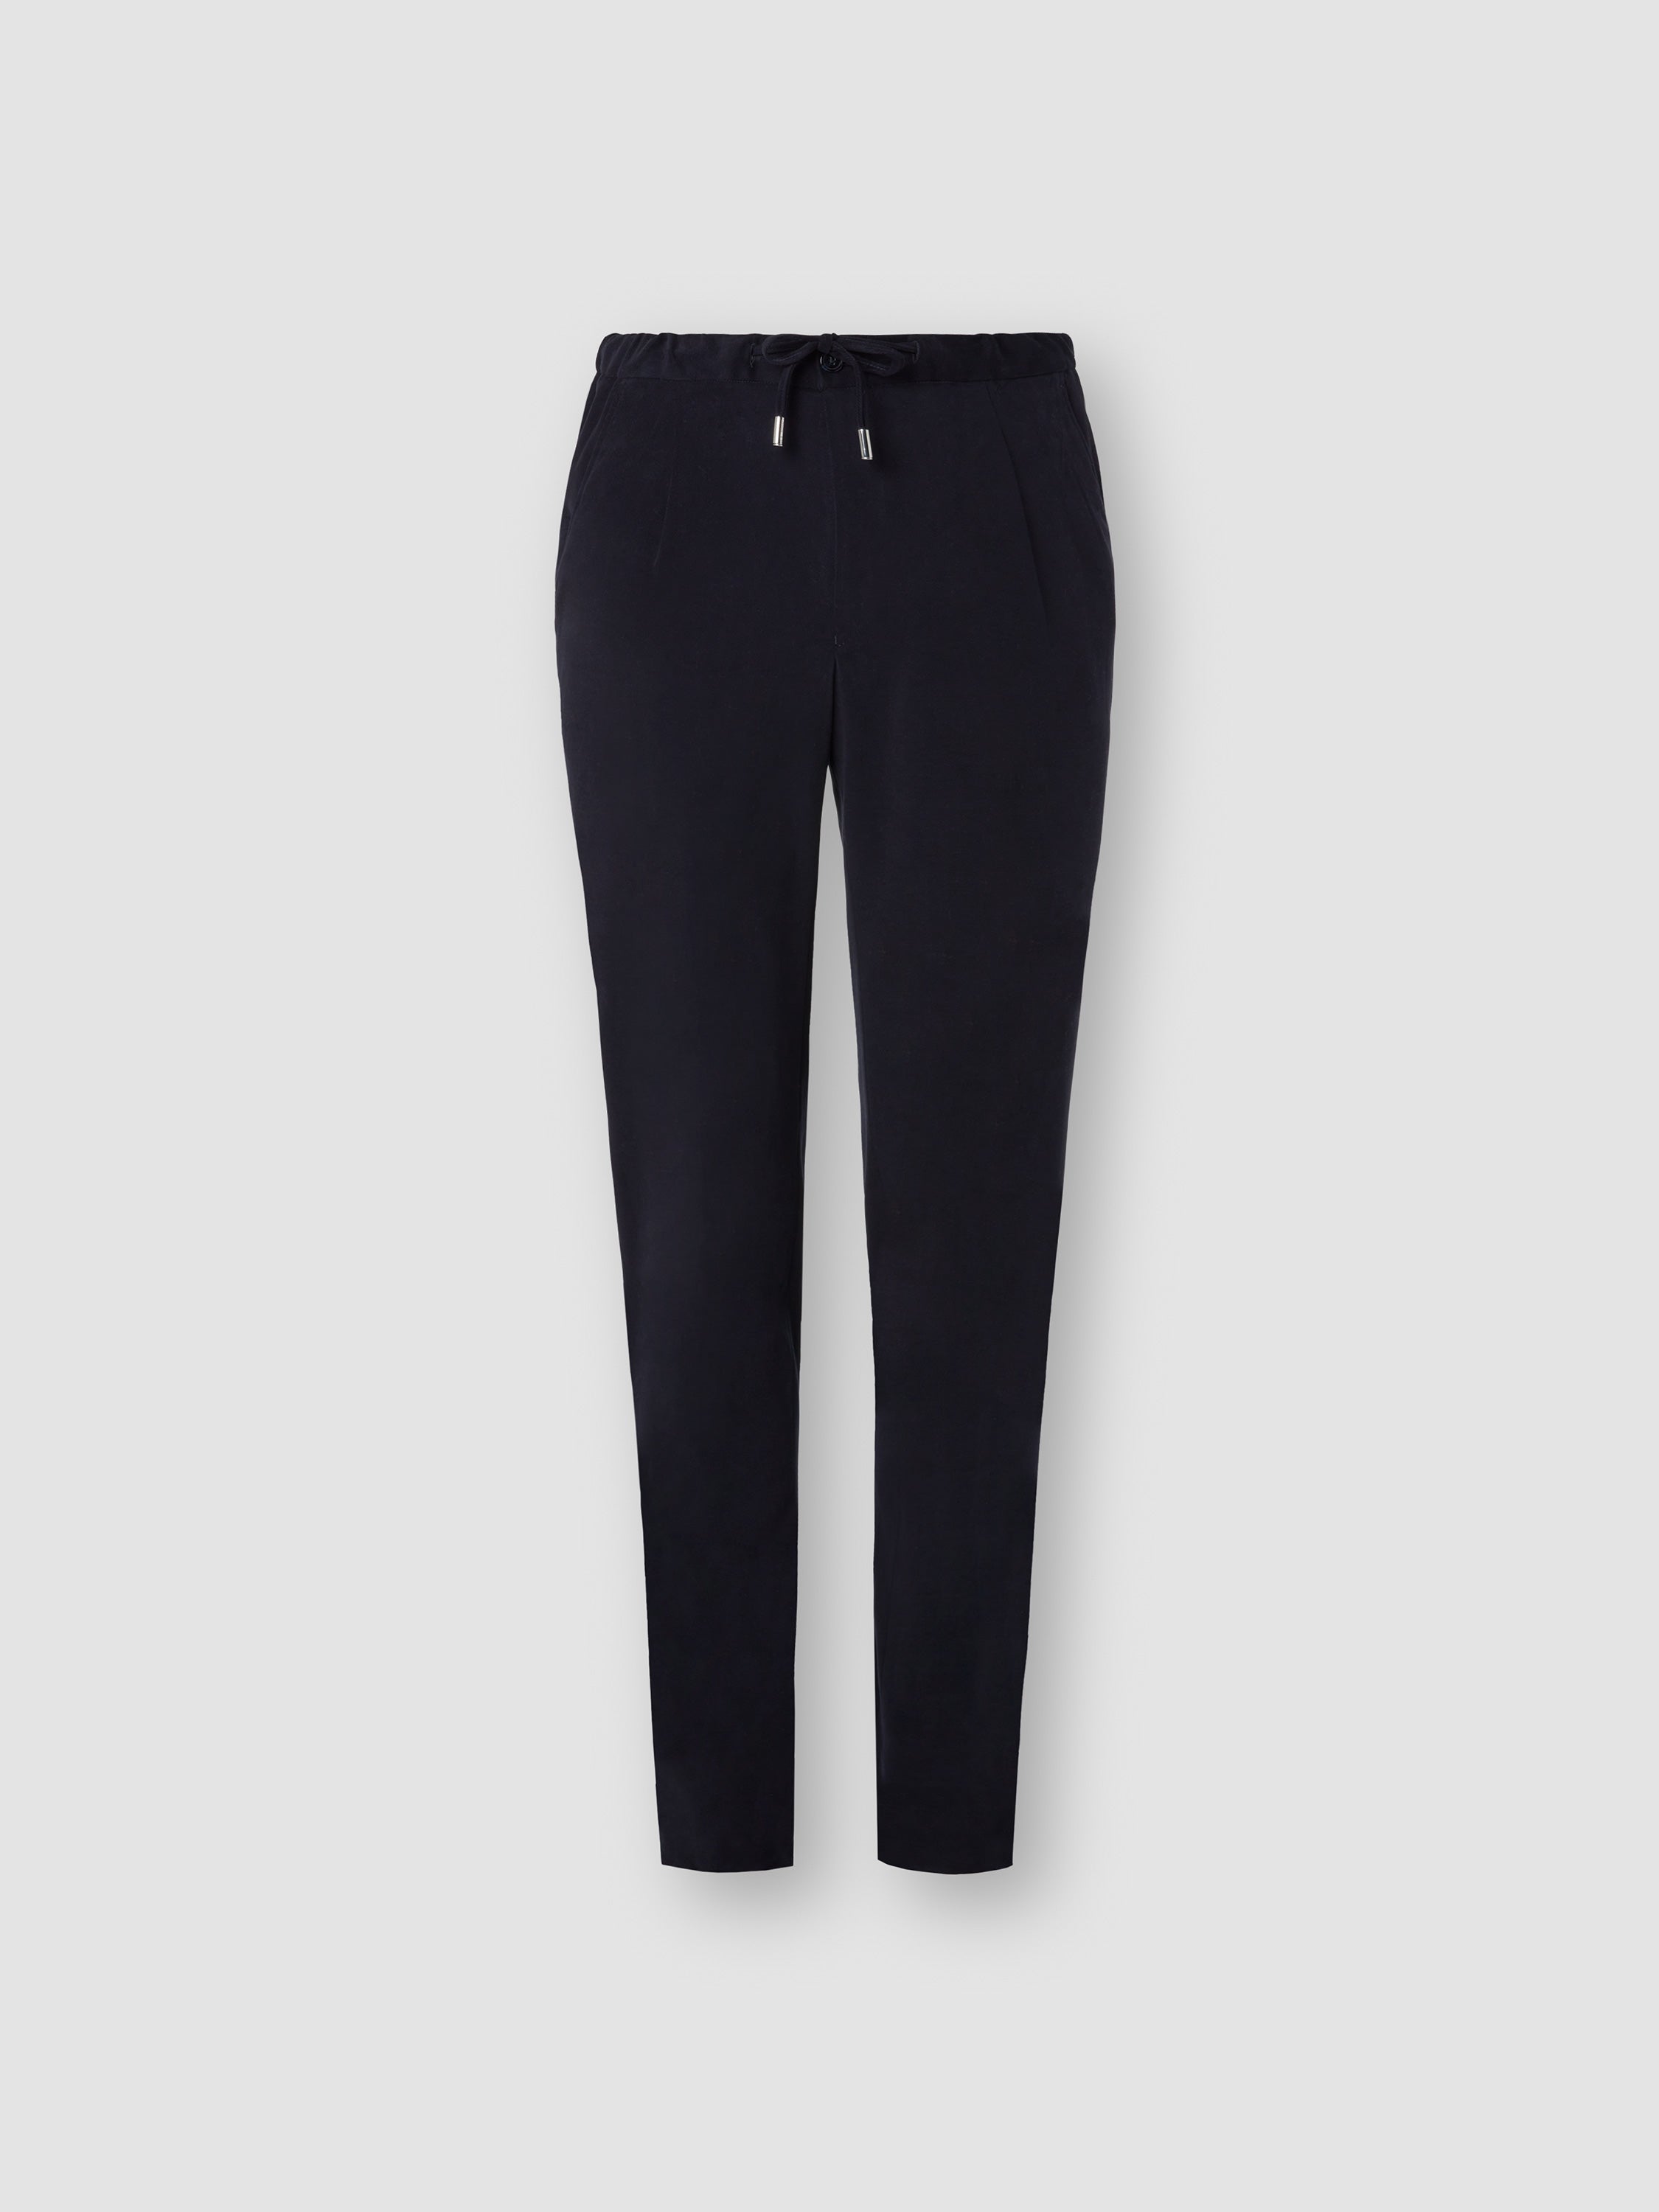 Brushed Cotton Casual Tailored Trousers Navy Product Image